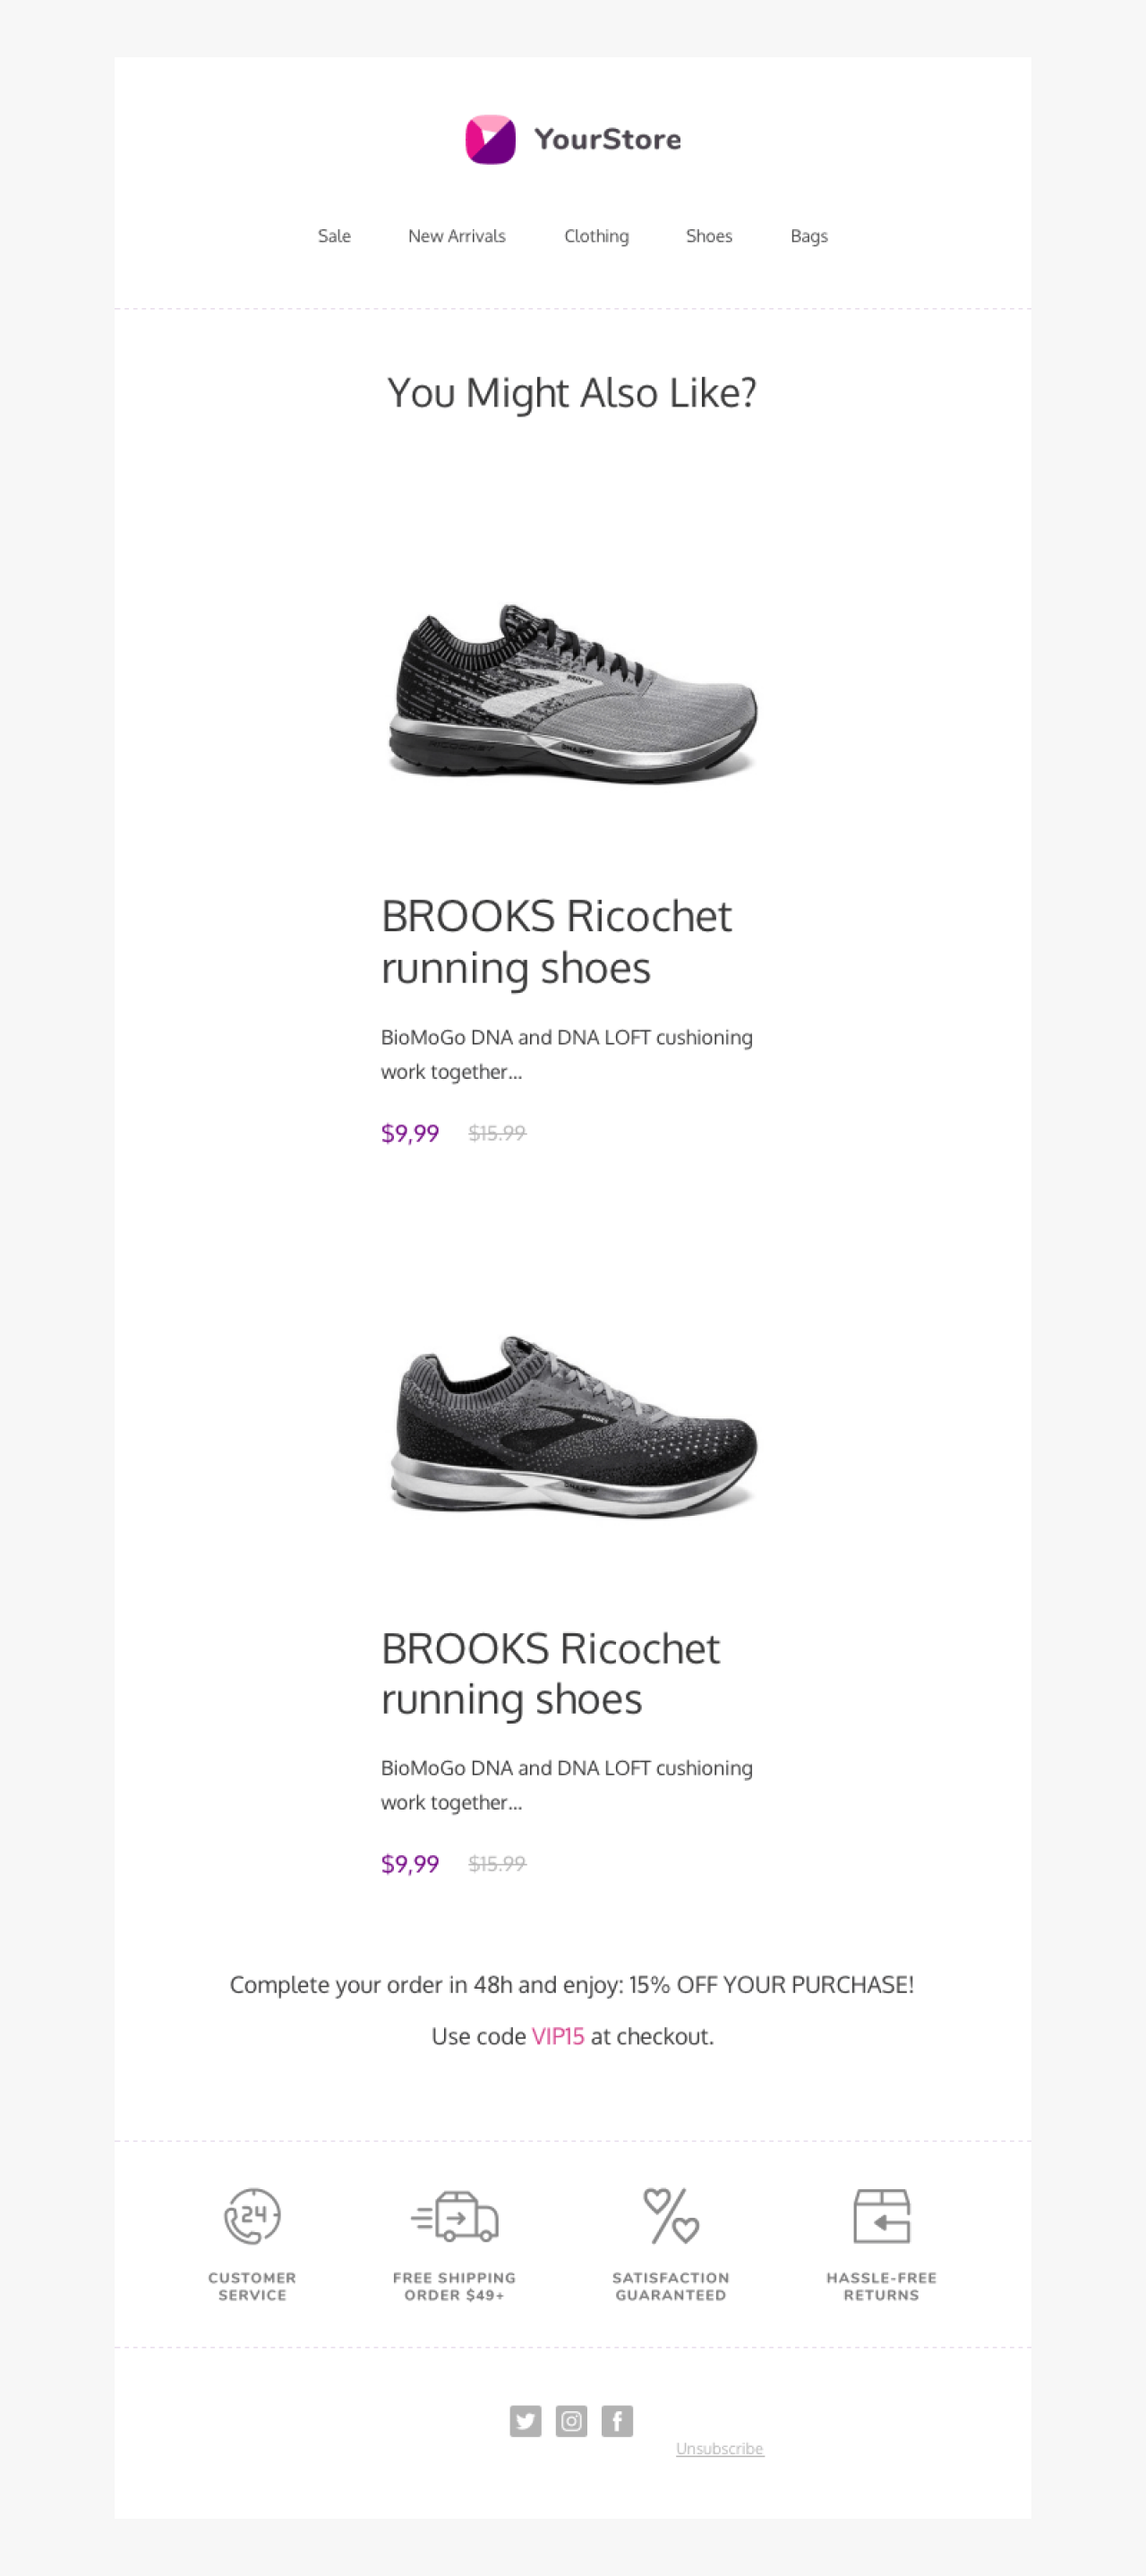 Product Recommendations example - Made with MailerLite